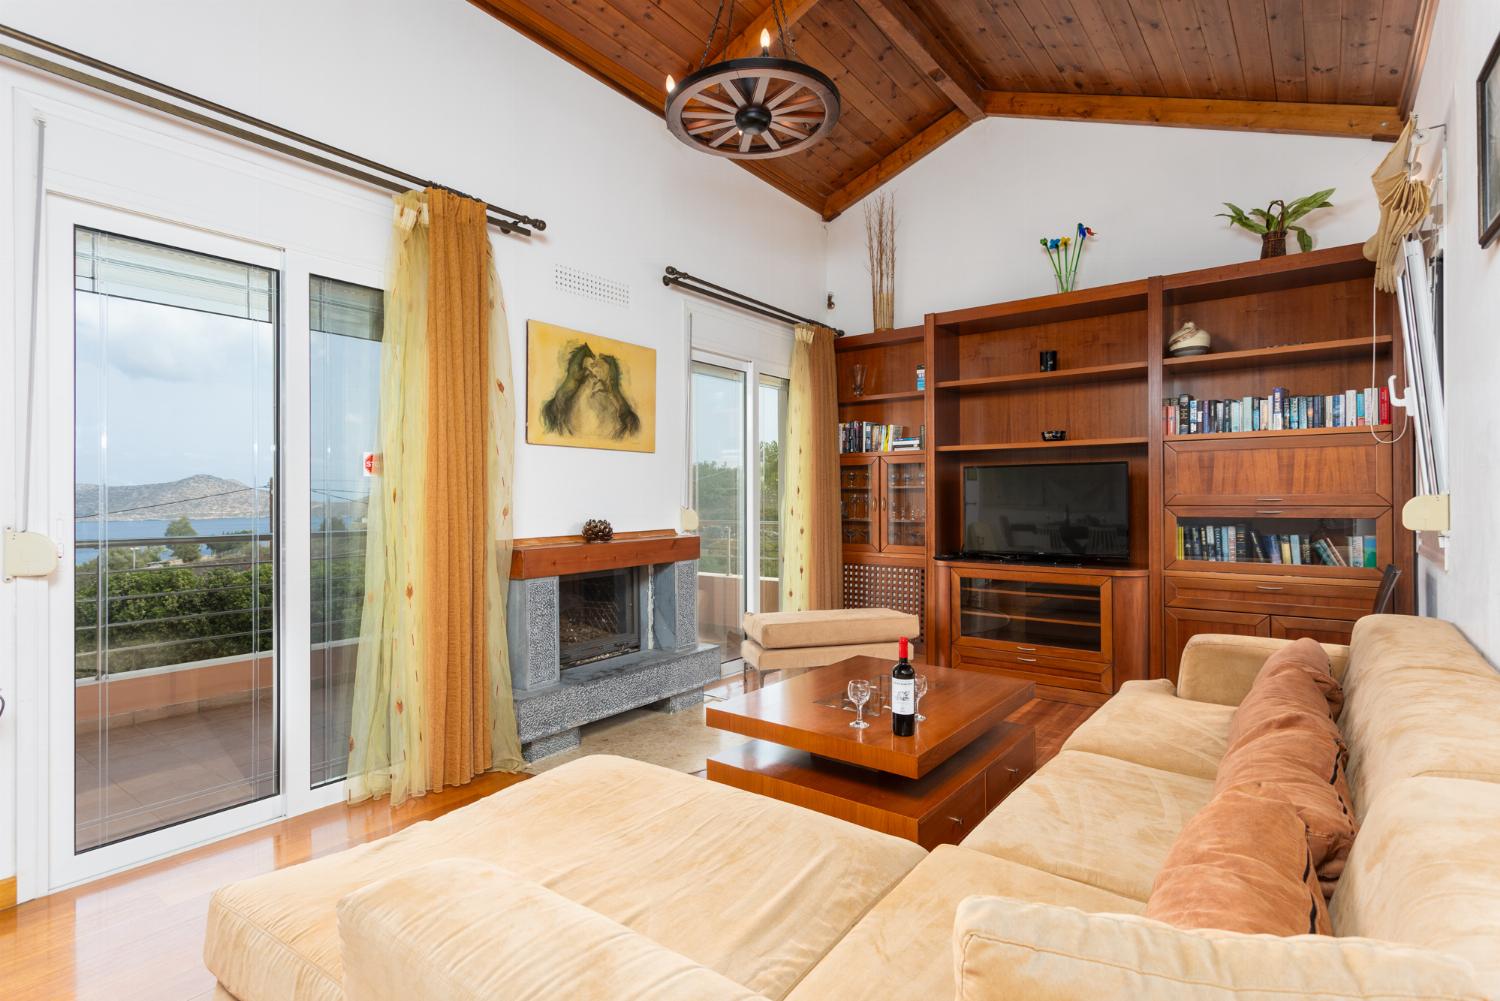 Open-plan living room with sofa, dining area, kitchen, A/C, WiFi internet, satellite TV, and sea views